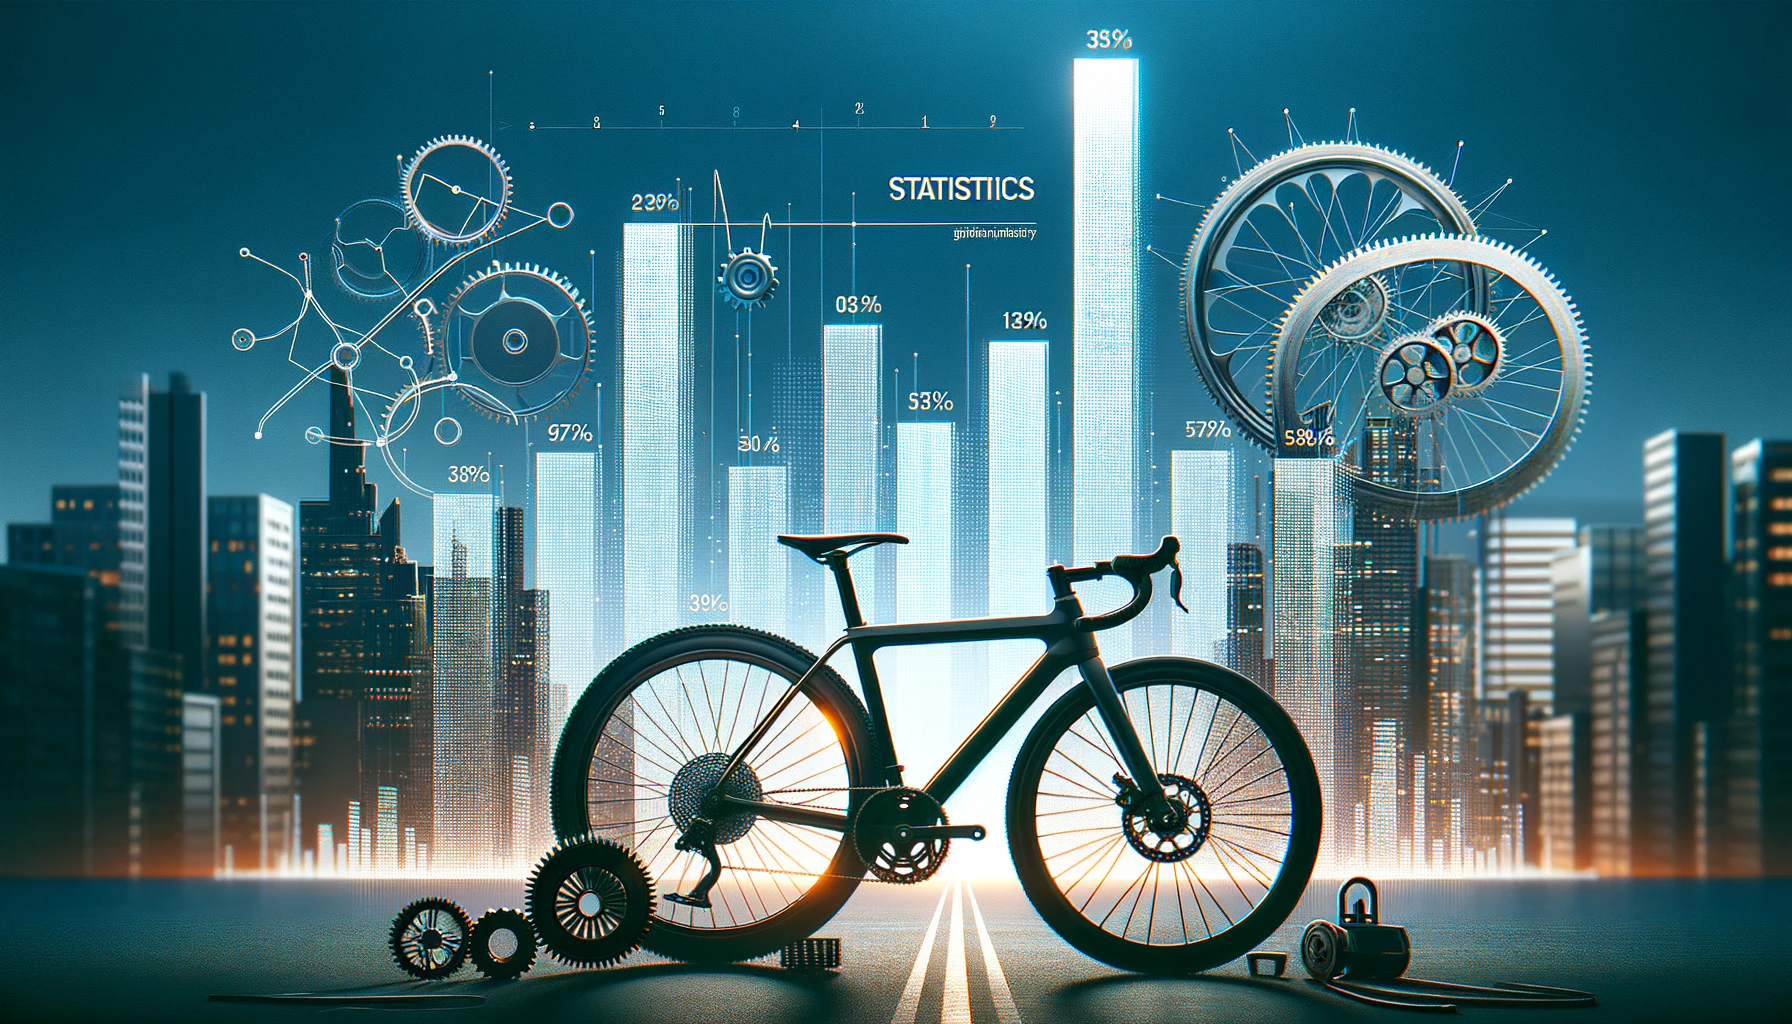 Bicycle Industry Statistics By Industry Trends, Benefits Of Cycling and Facts